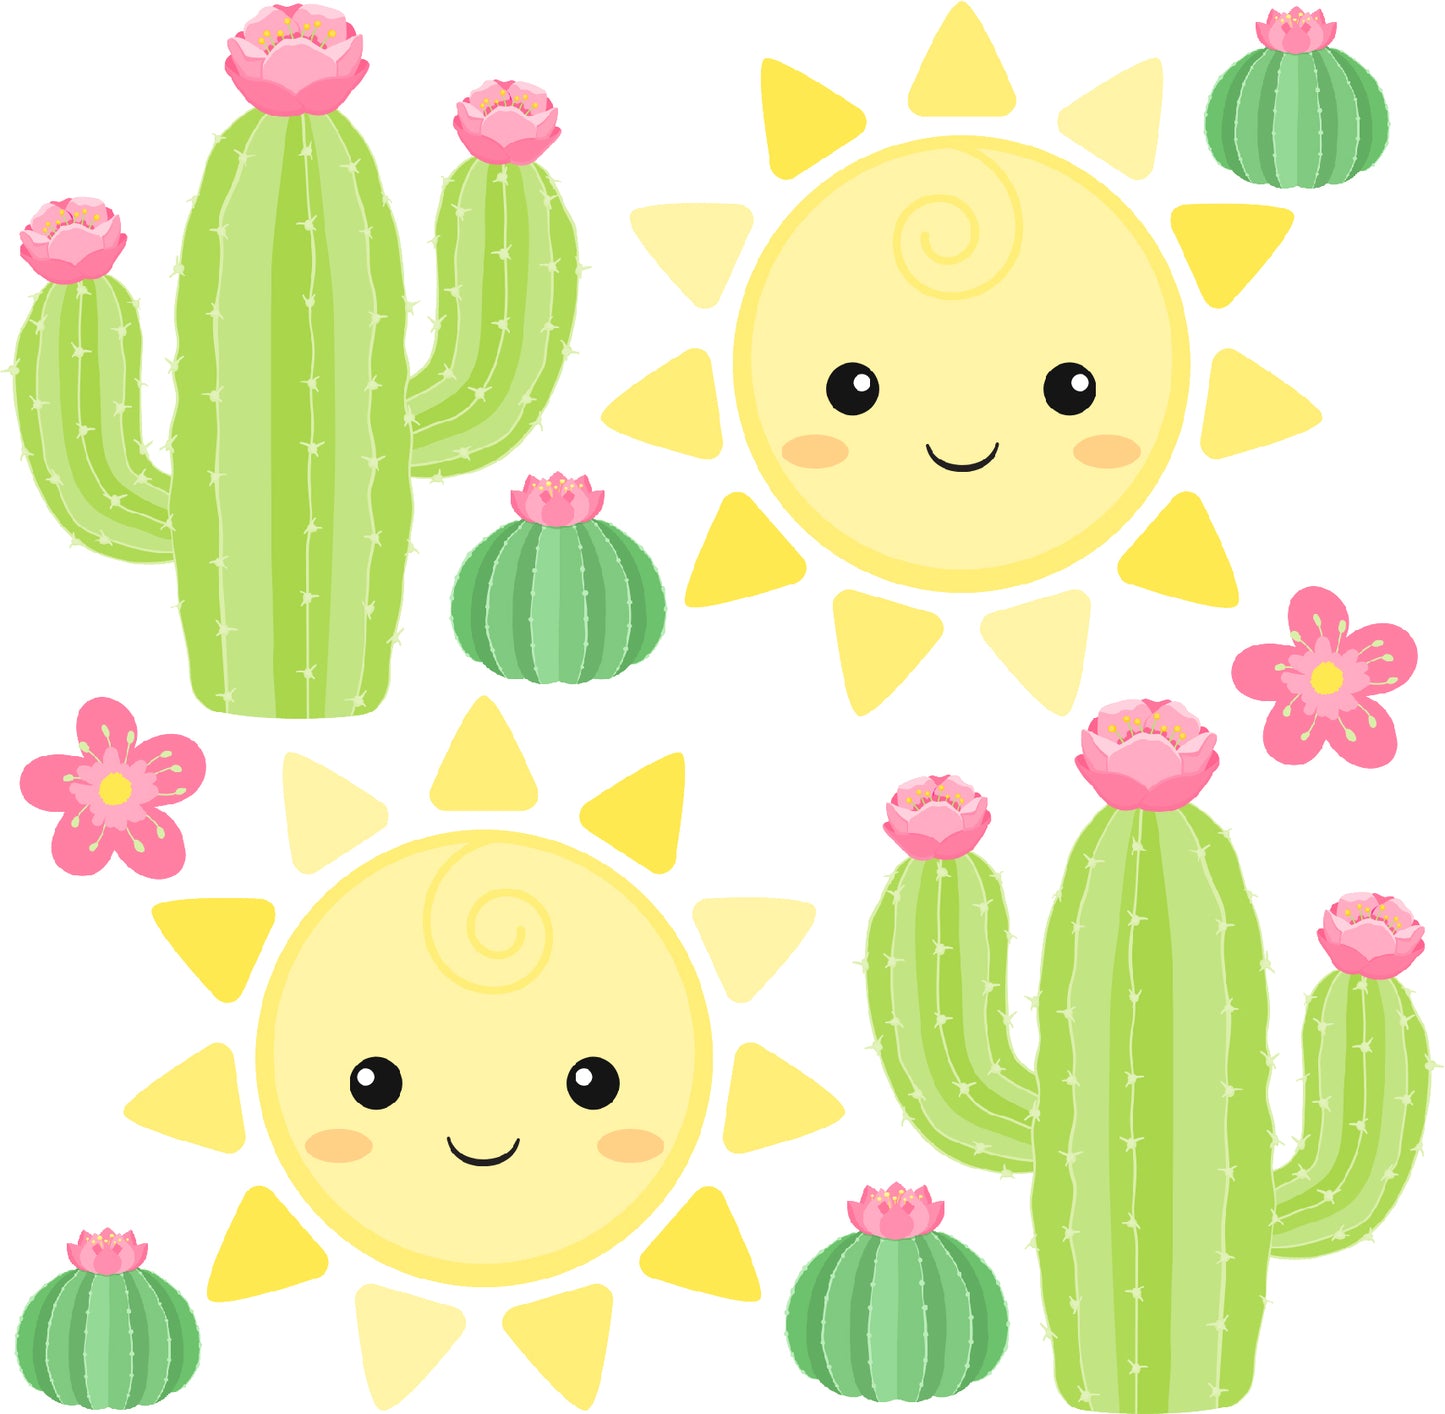 Sun and Cactus Cacti Half Sheet Misc. (Must Purchase 2 Half sheets - You Can Mix & Match)